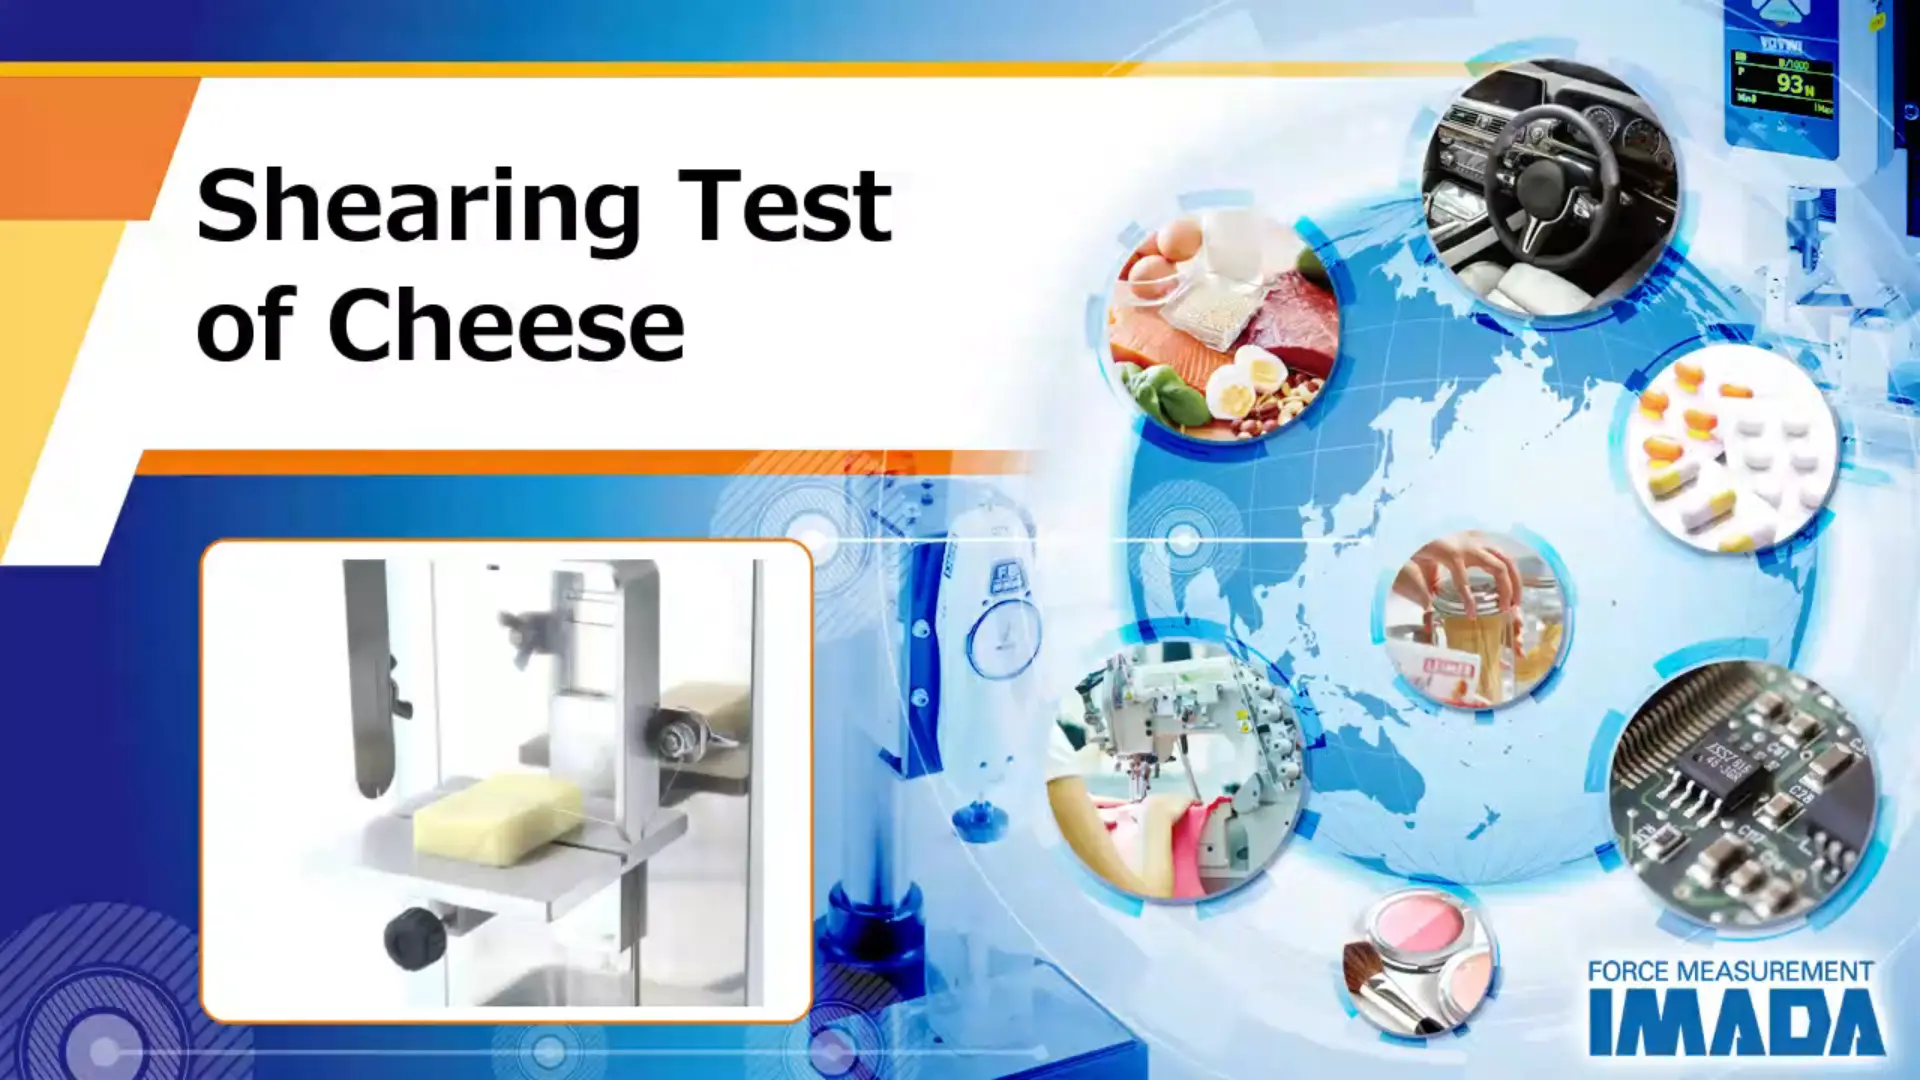 Shearing Test of Cheese